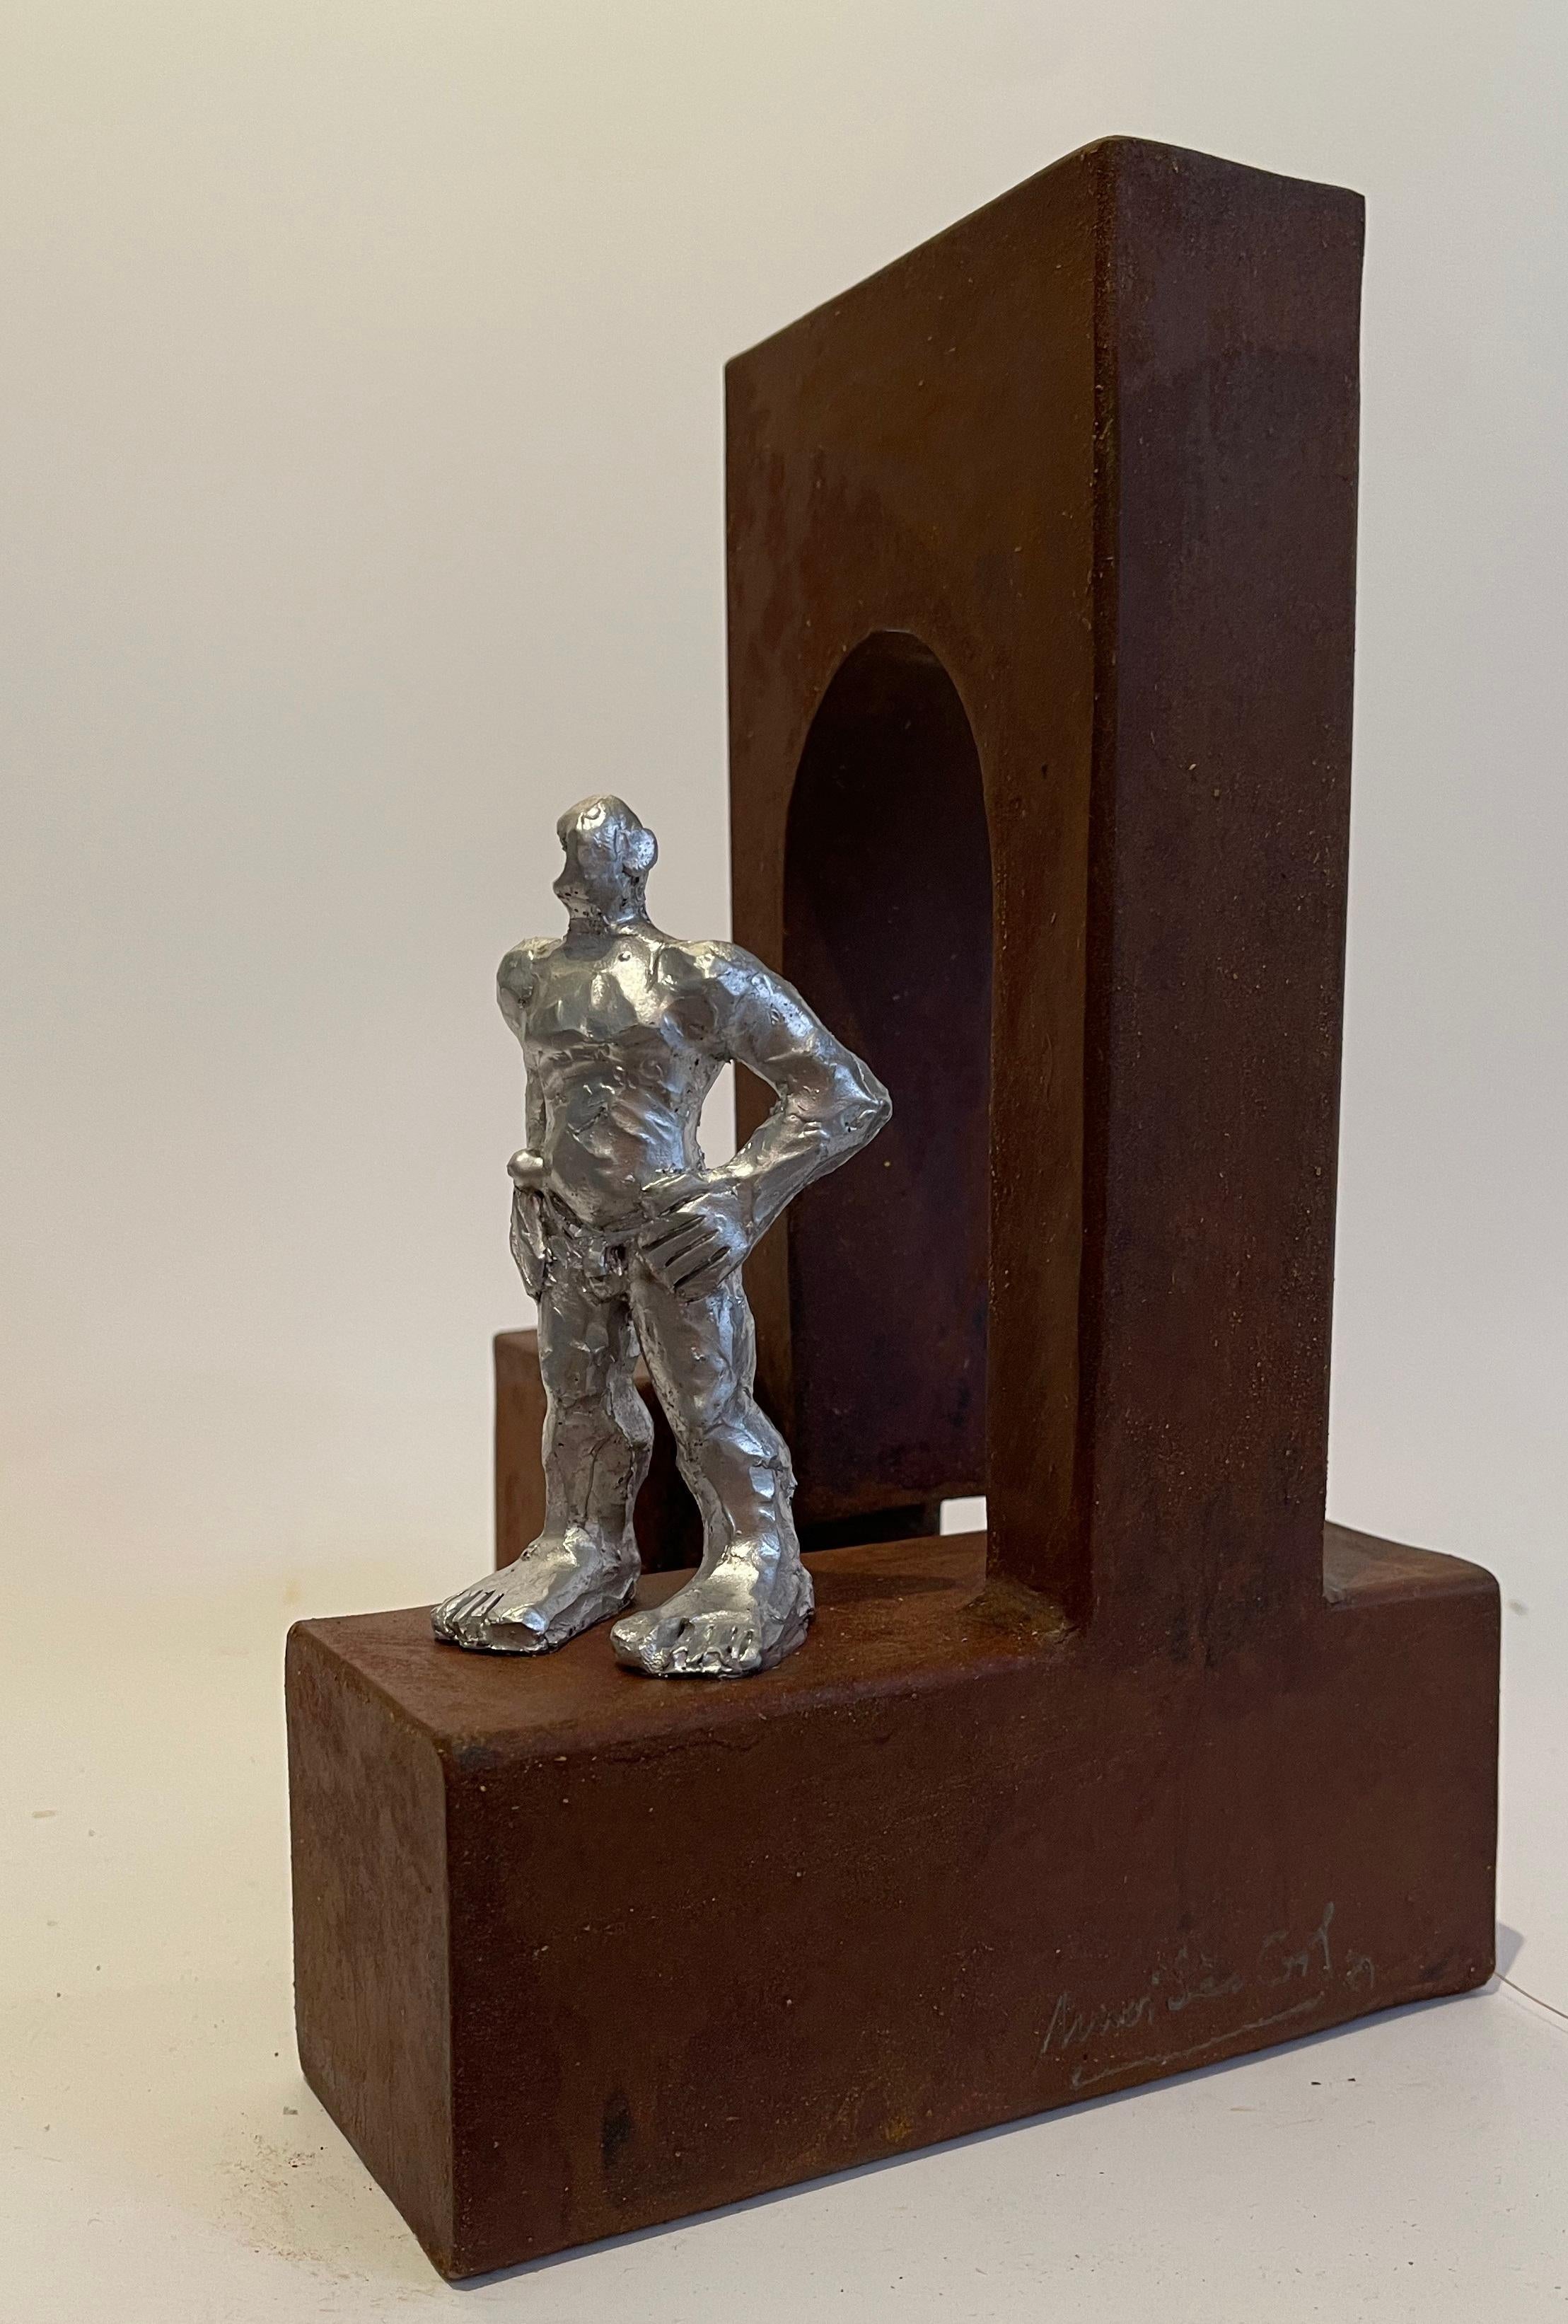 Abstract Men Sculpture Brown Rusted Metal Silver Resin  - Gray Figurative Sculpture by Moisés Gil